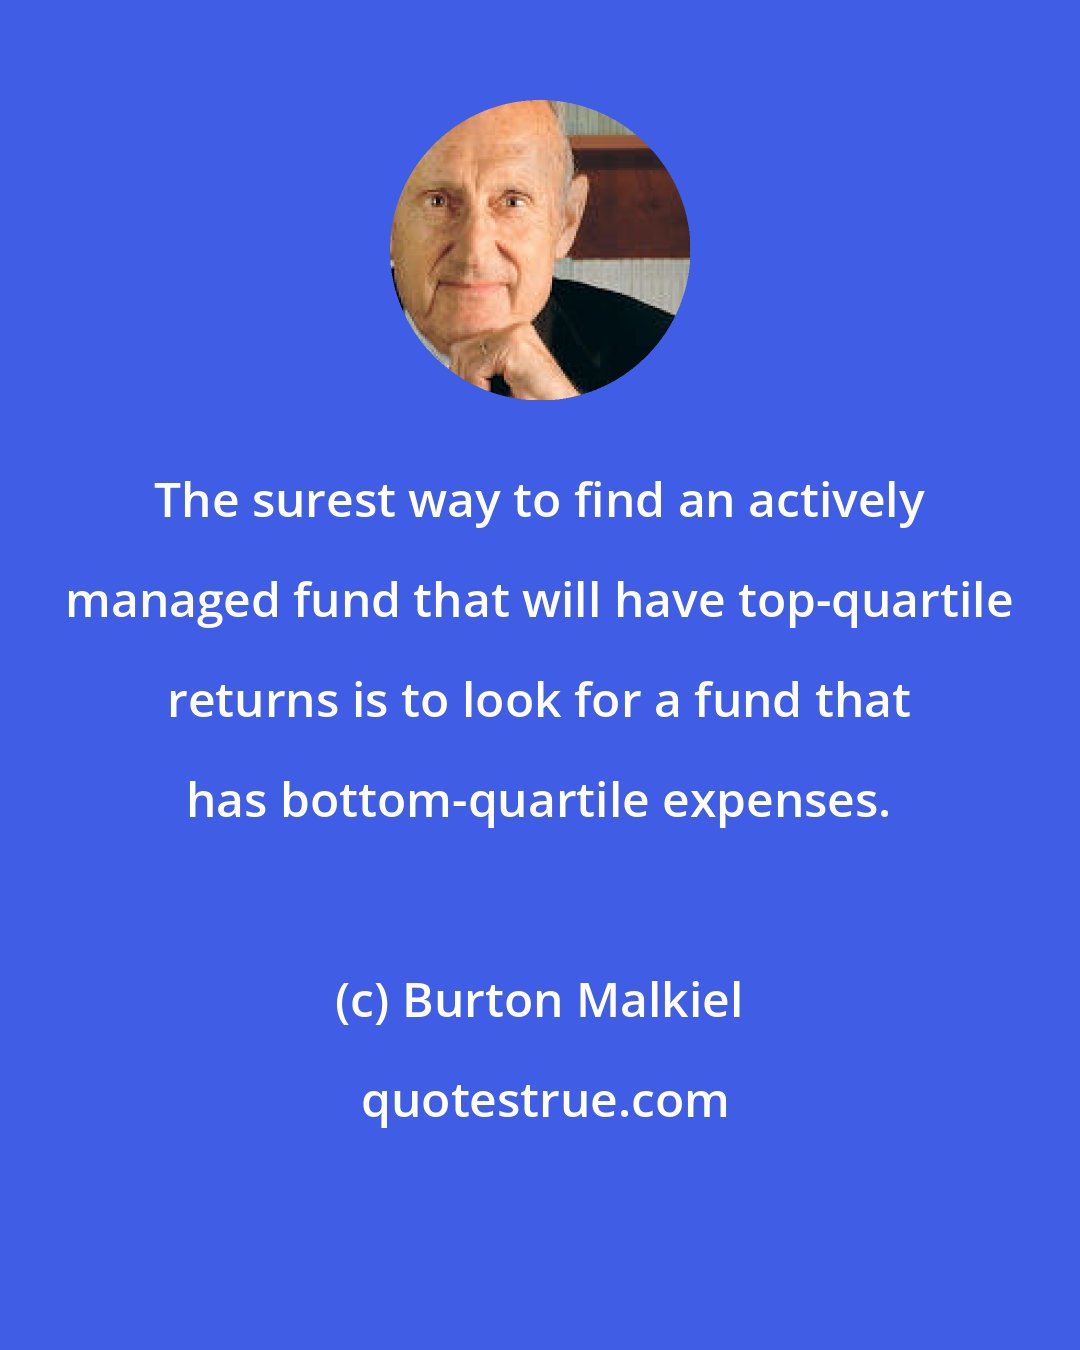 Burton Malkiel: The surest way to find an actively managed fund that will have top-quartile returns is to look for a fund that has bottom-quartile expenses.